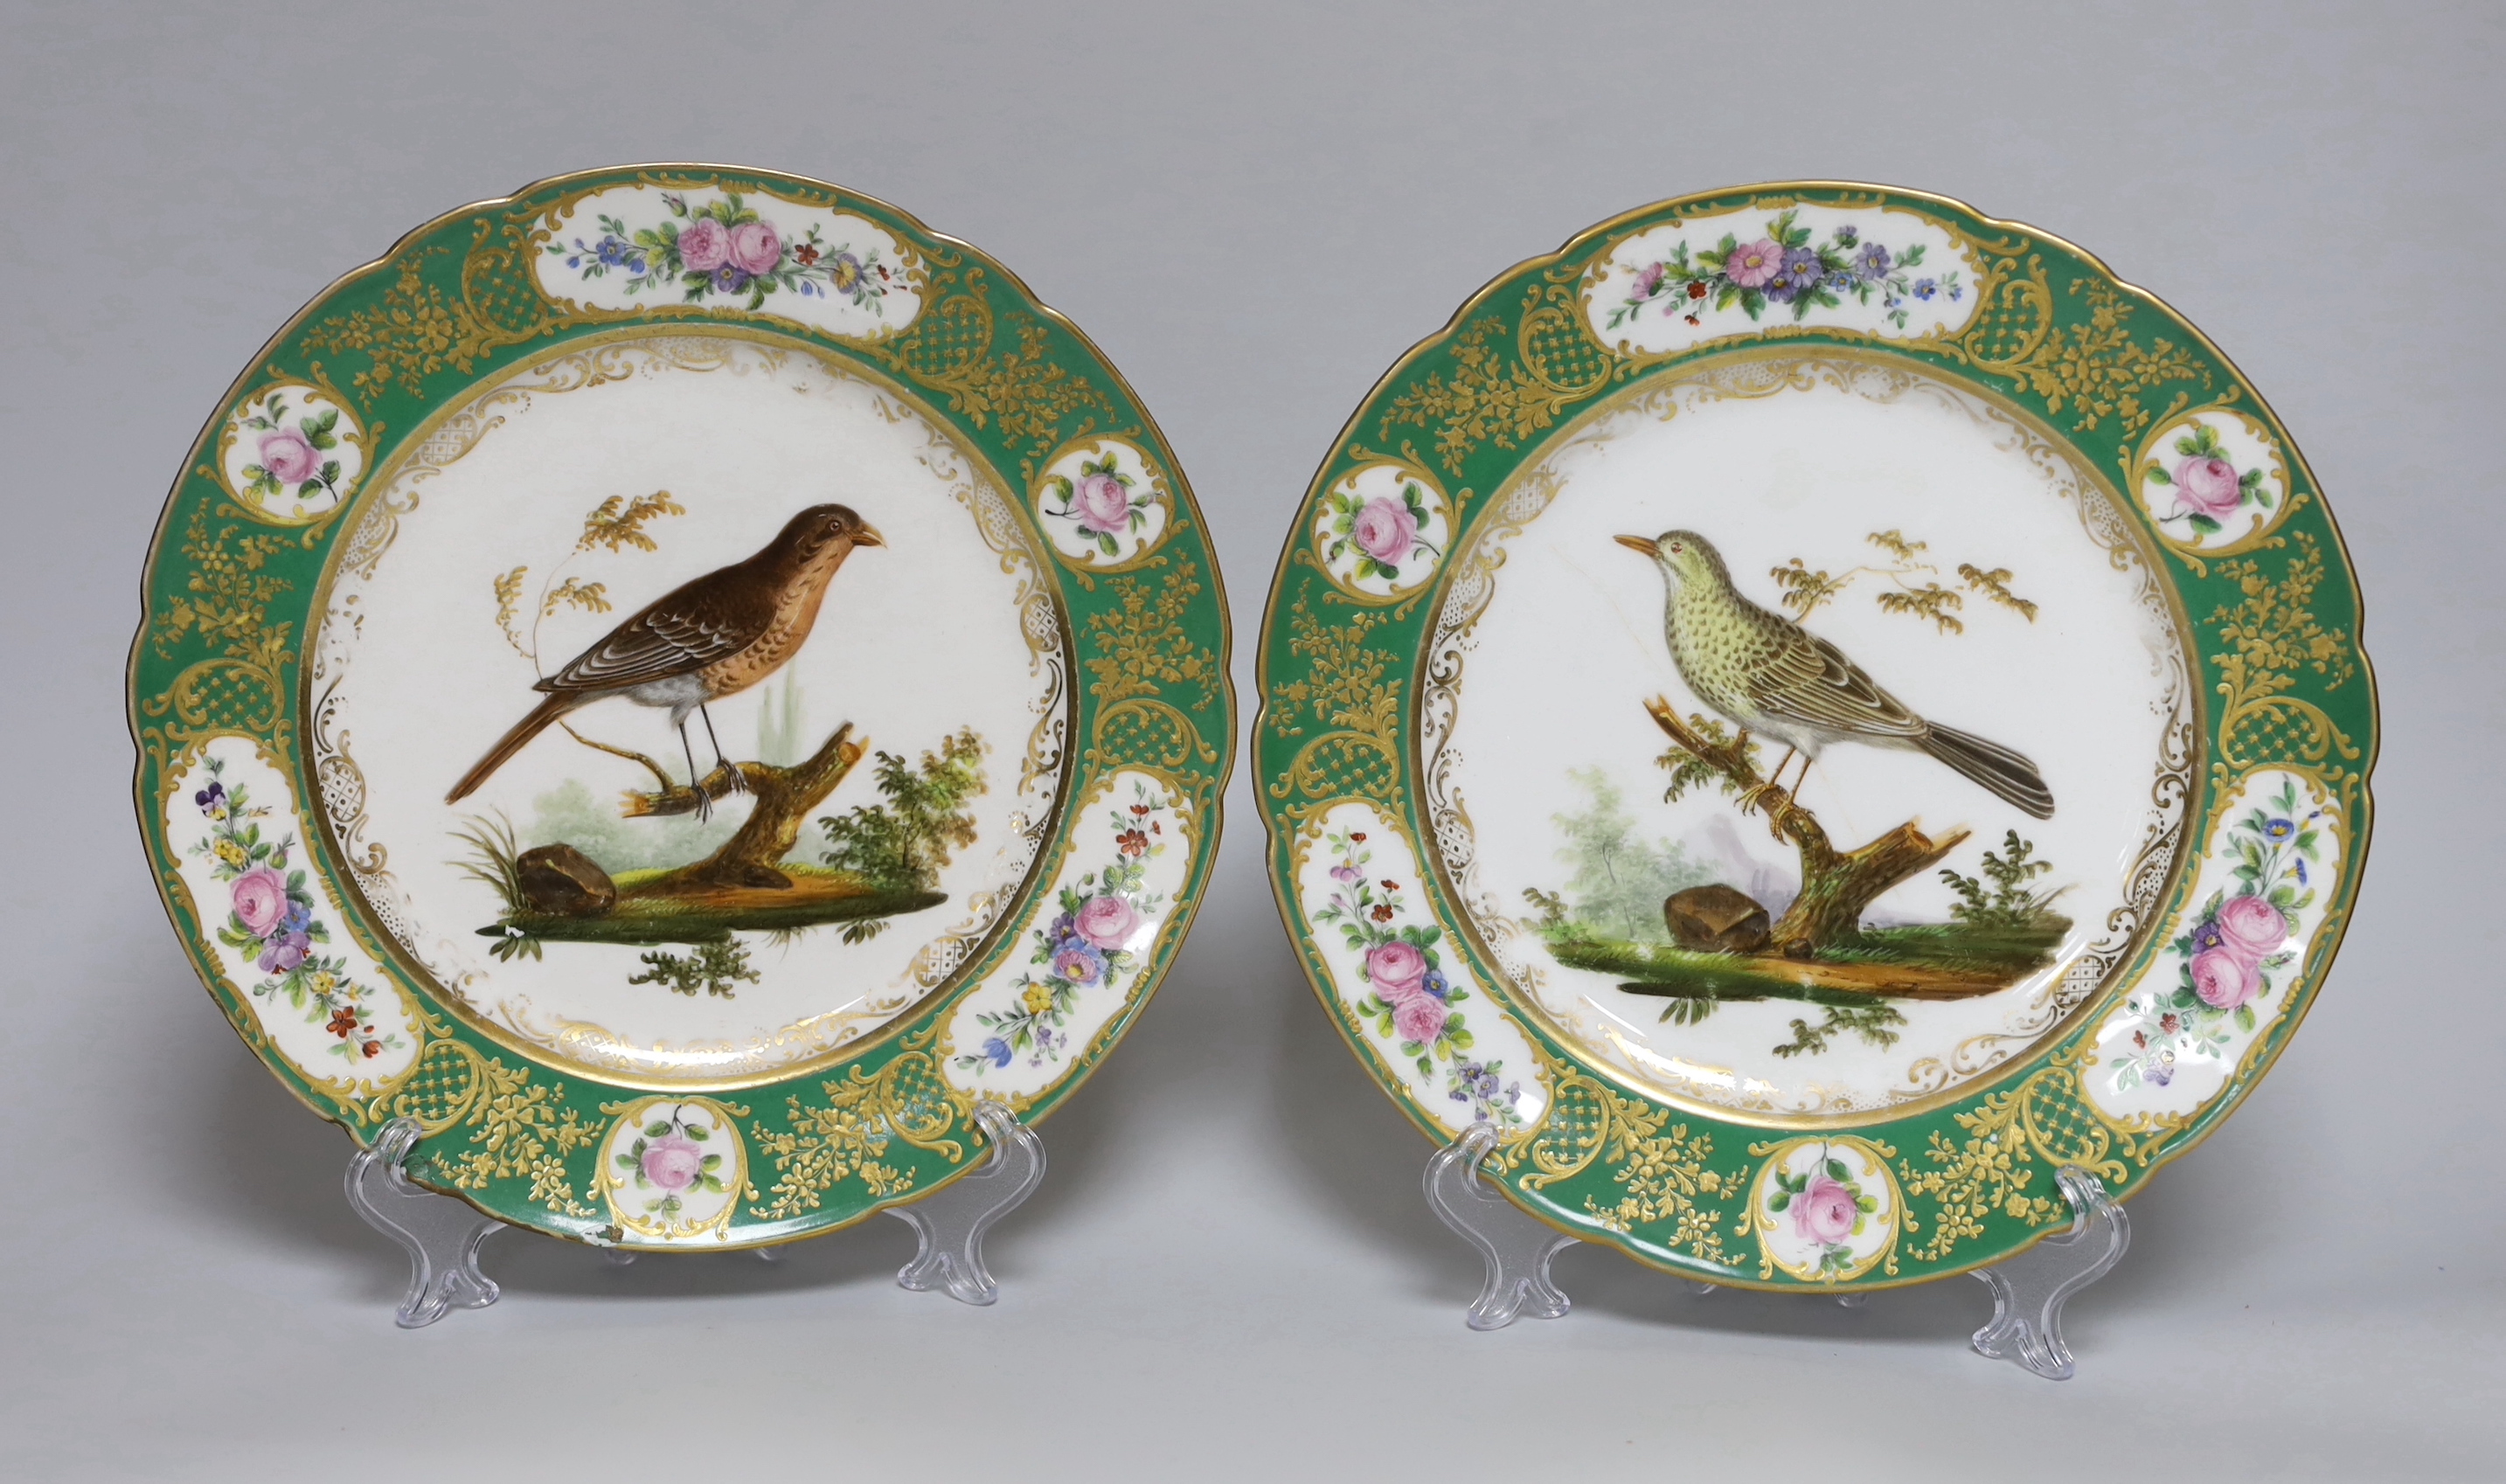 A pair of early 19th century Paris porcelain ornithological plates each painted by Jean-Pierre